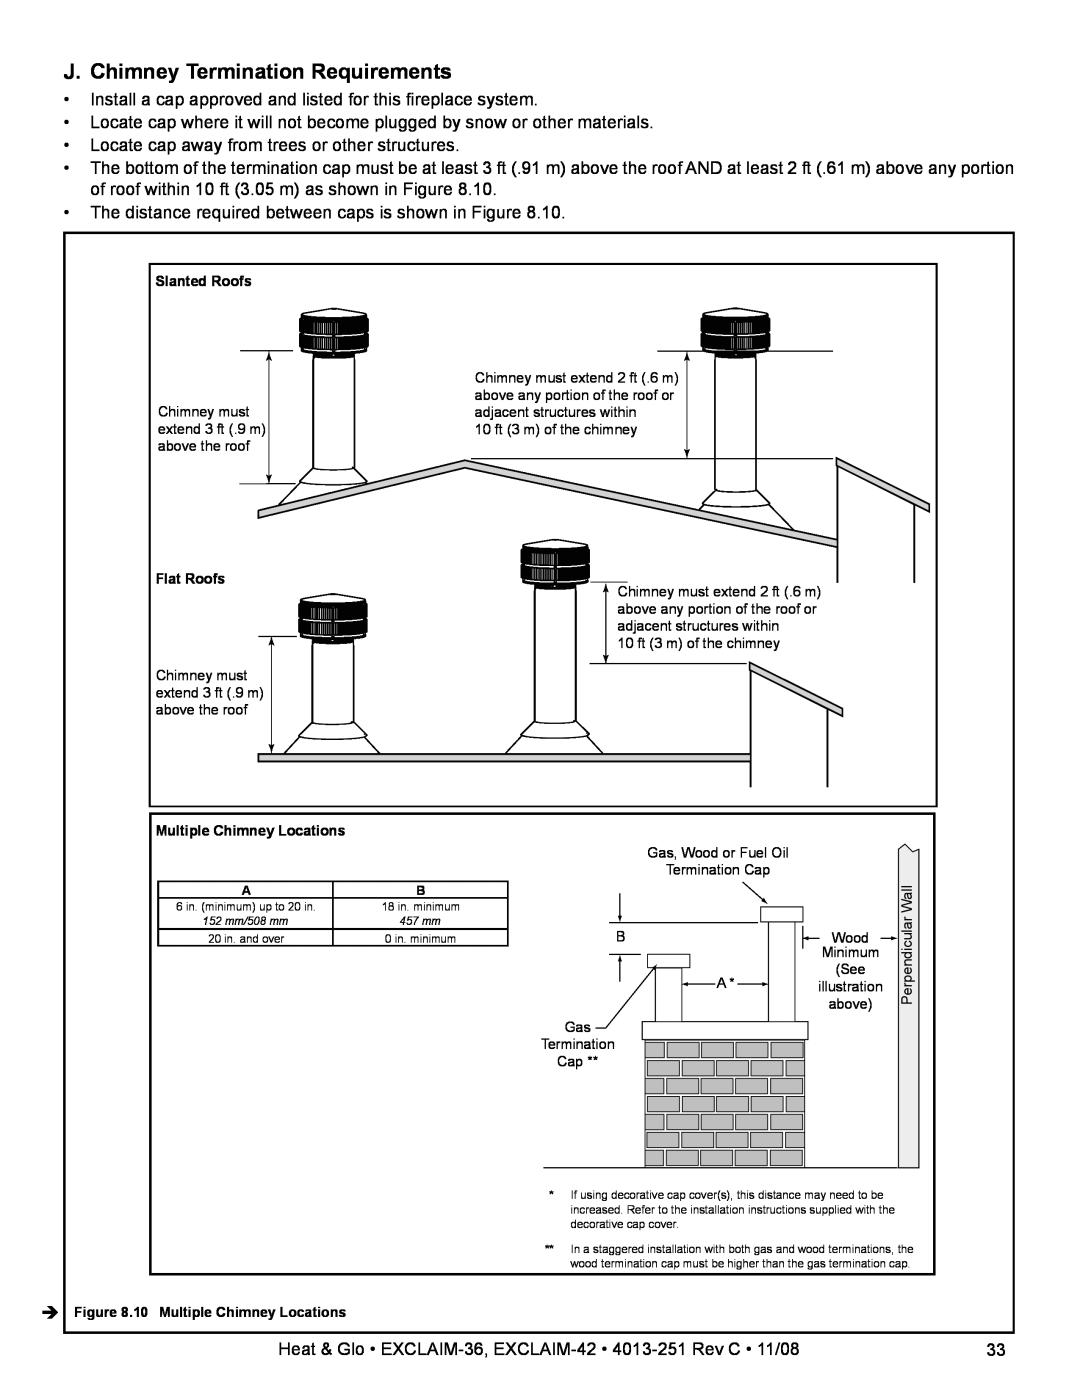 Hearth and Home Technologies EXCLAIM-36 owner manual J. Chimney Termination Requirements, Multiple Chimney Locations 